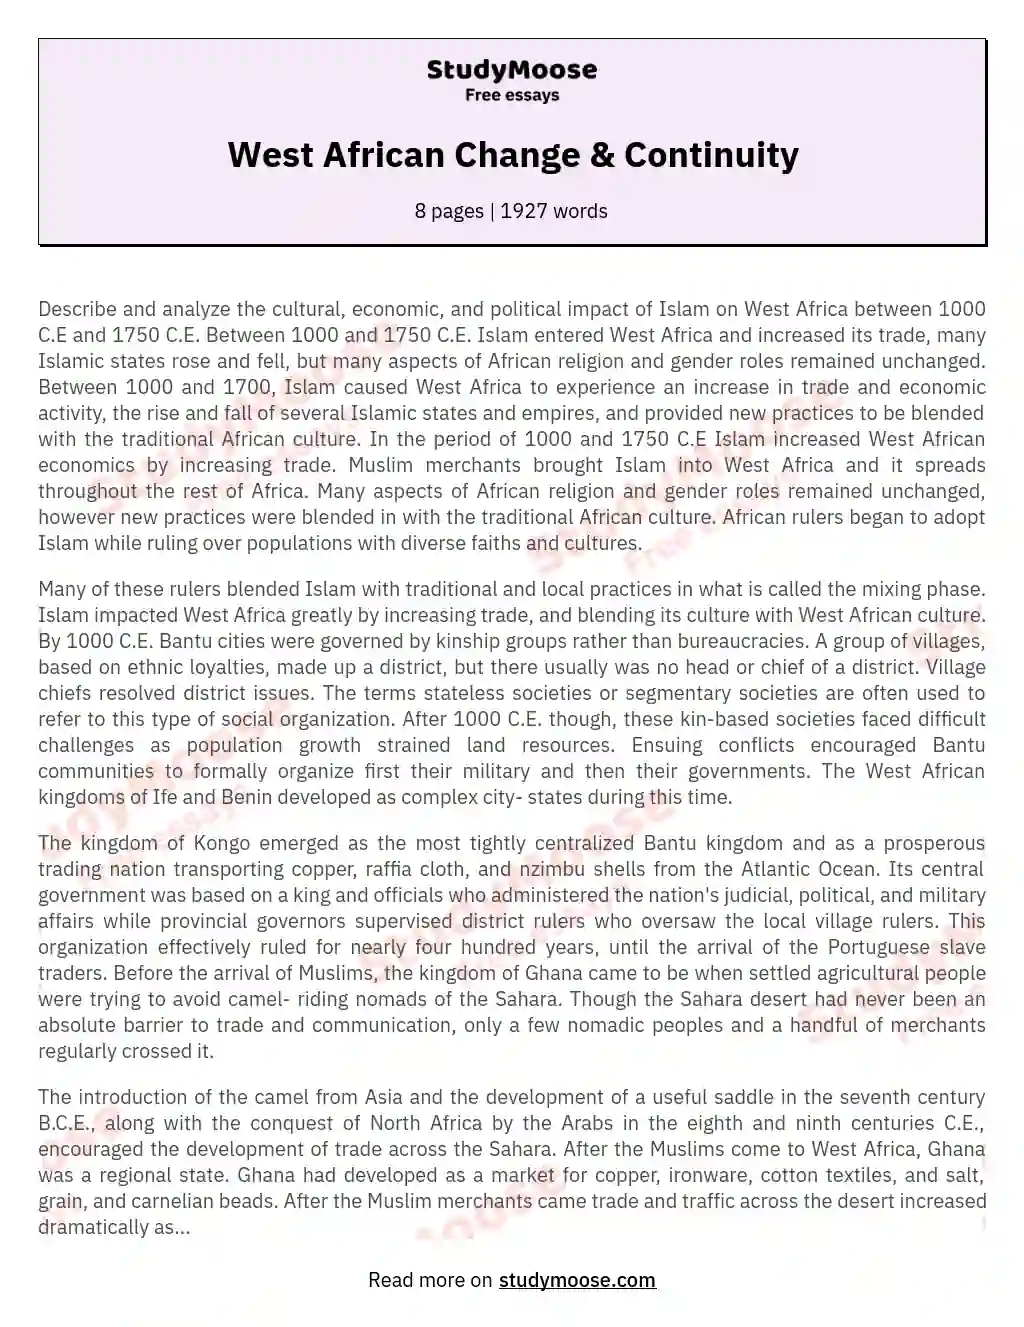 West African Change & Continuity essay